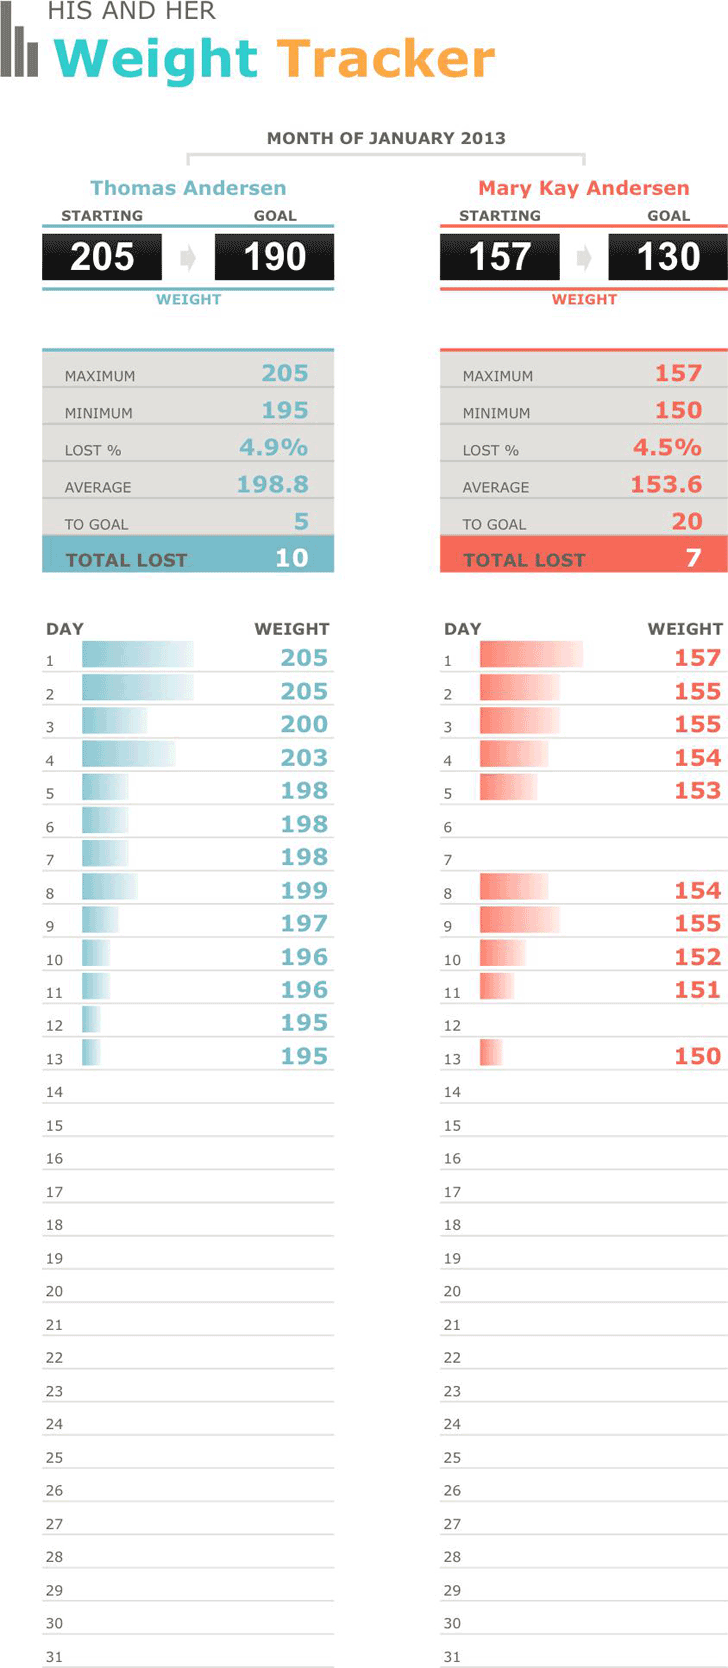 His And Her Weight Loss Tracker Chart